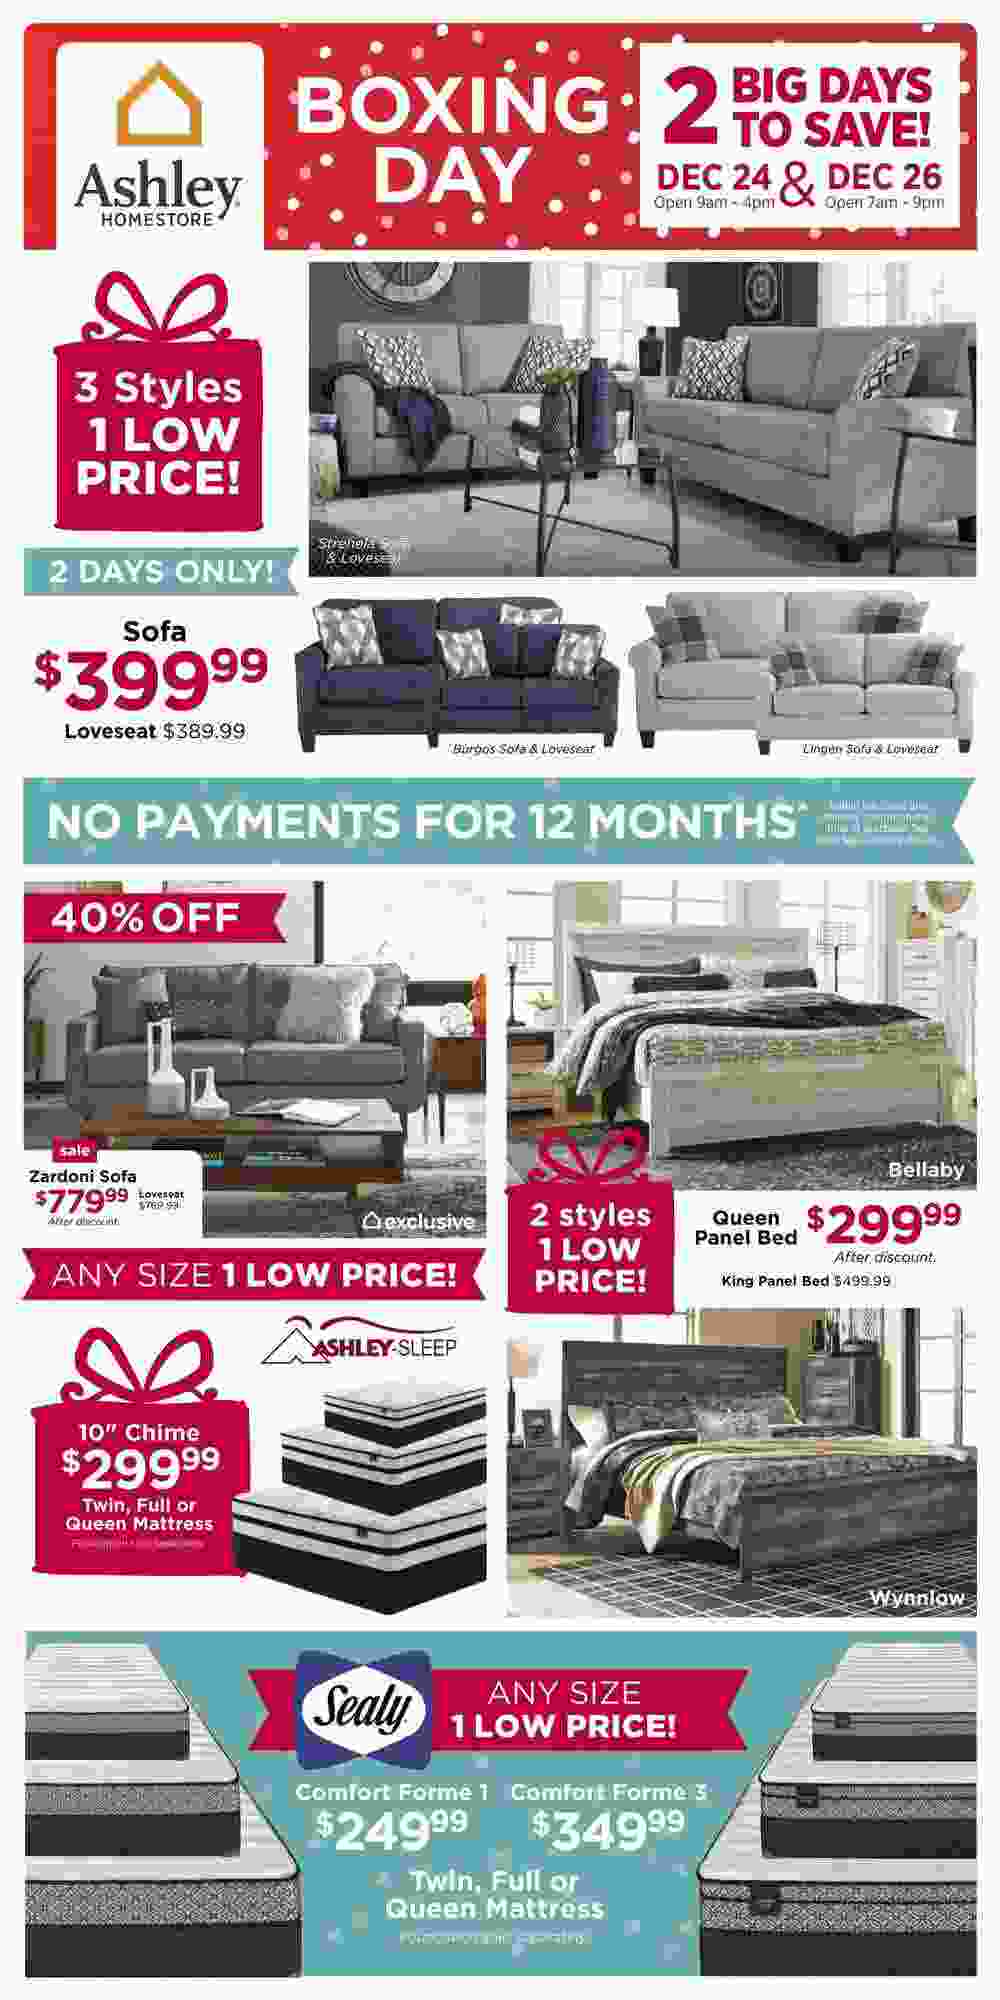 Ashley Furniture Homestore Flyer On Boxing Day Sale December 24